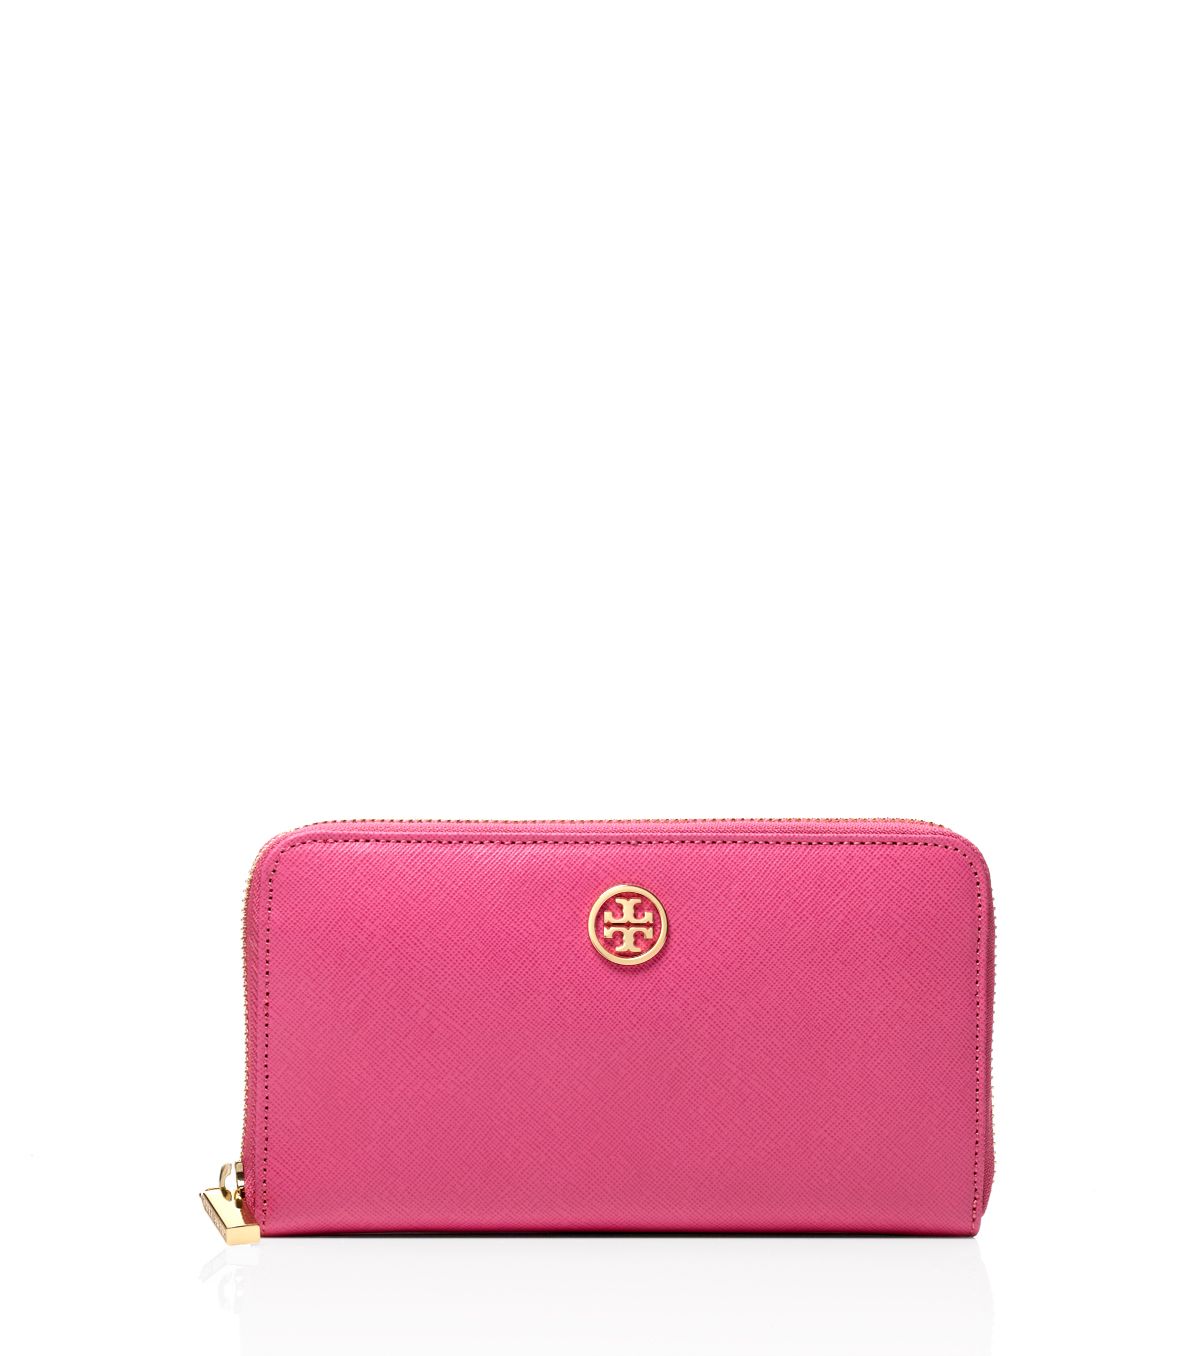 Tory Burch Robinson Zip-Around Wallet in Pink (tory pink) | Lyst